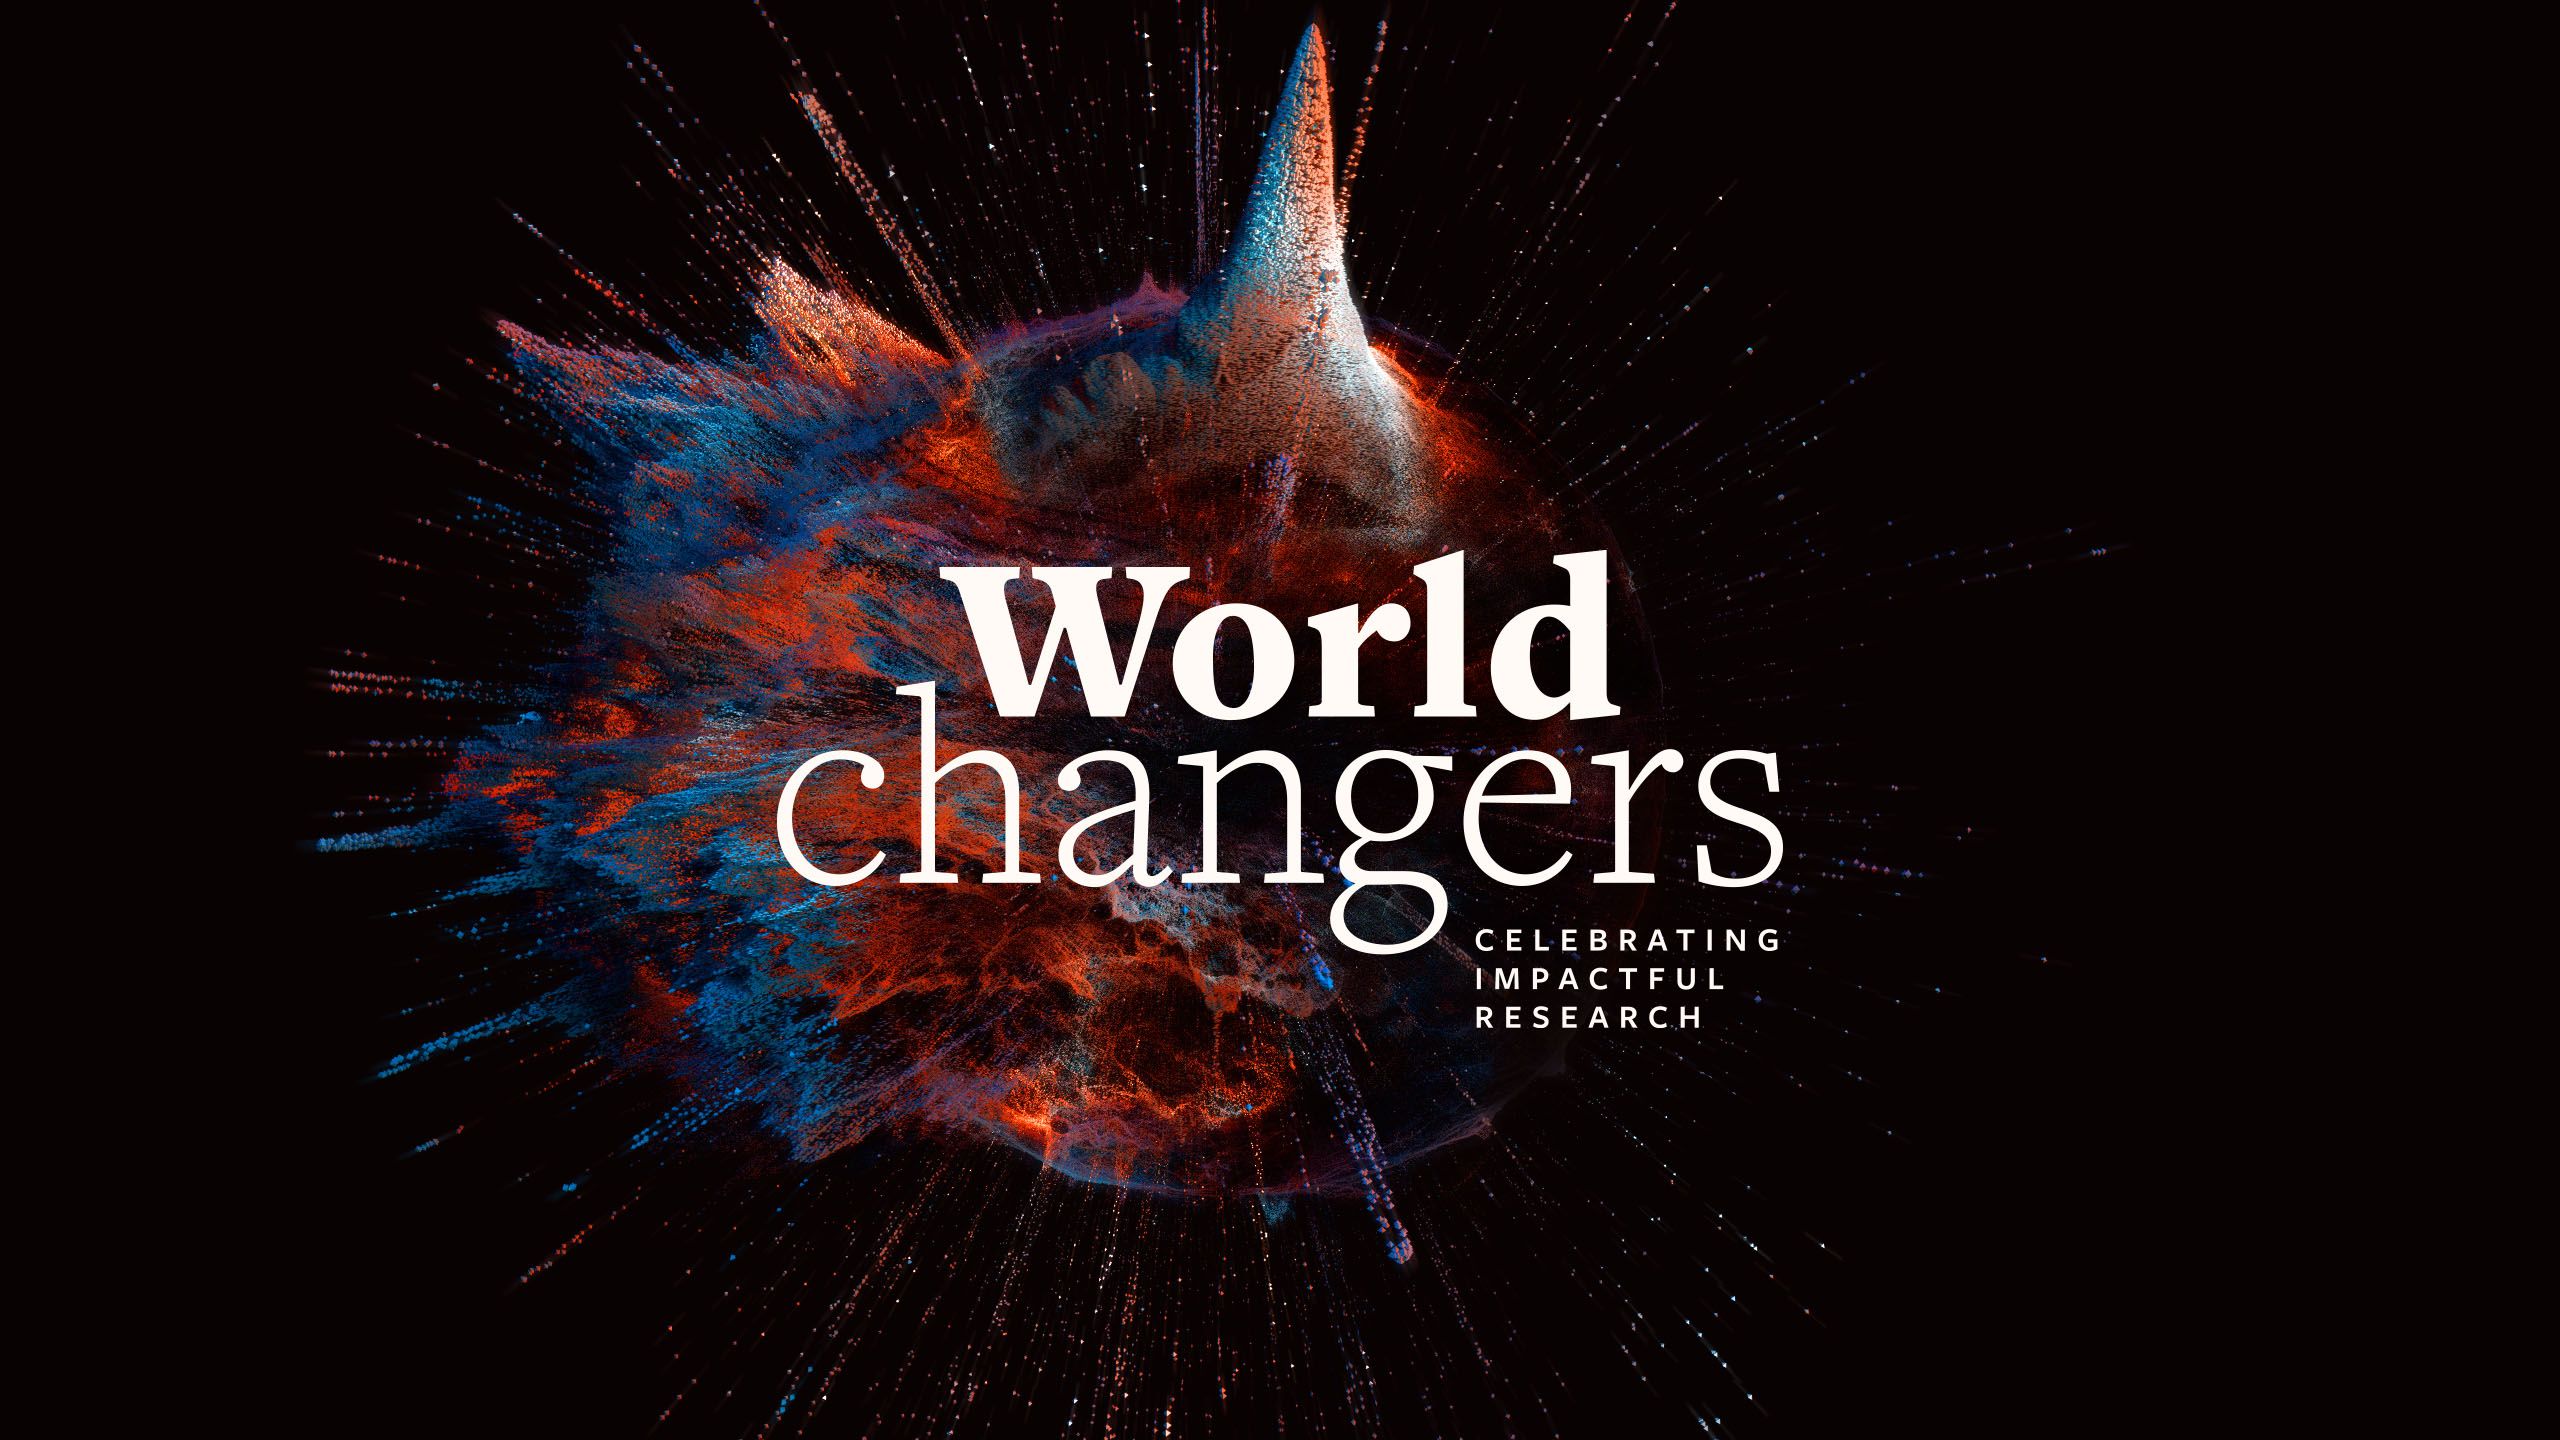 The World changers logo on top of an explosion of colours